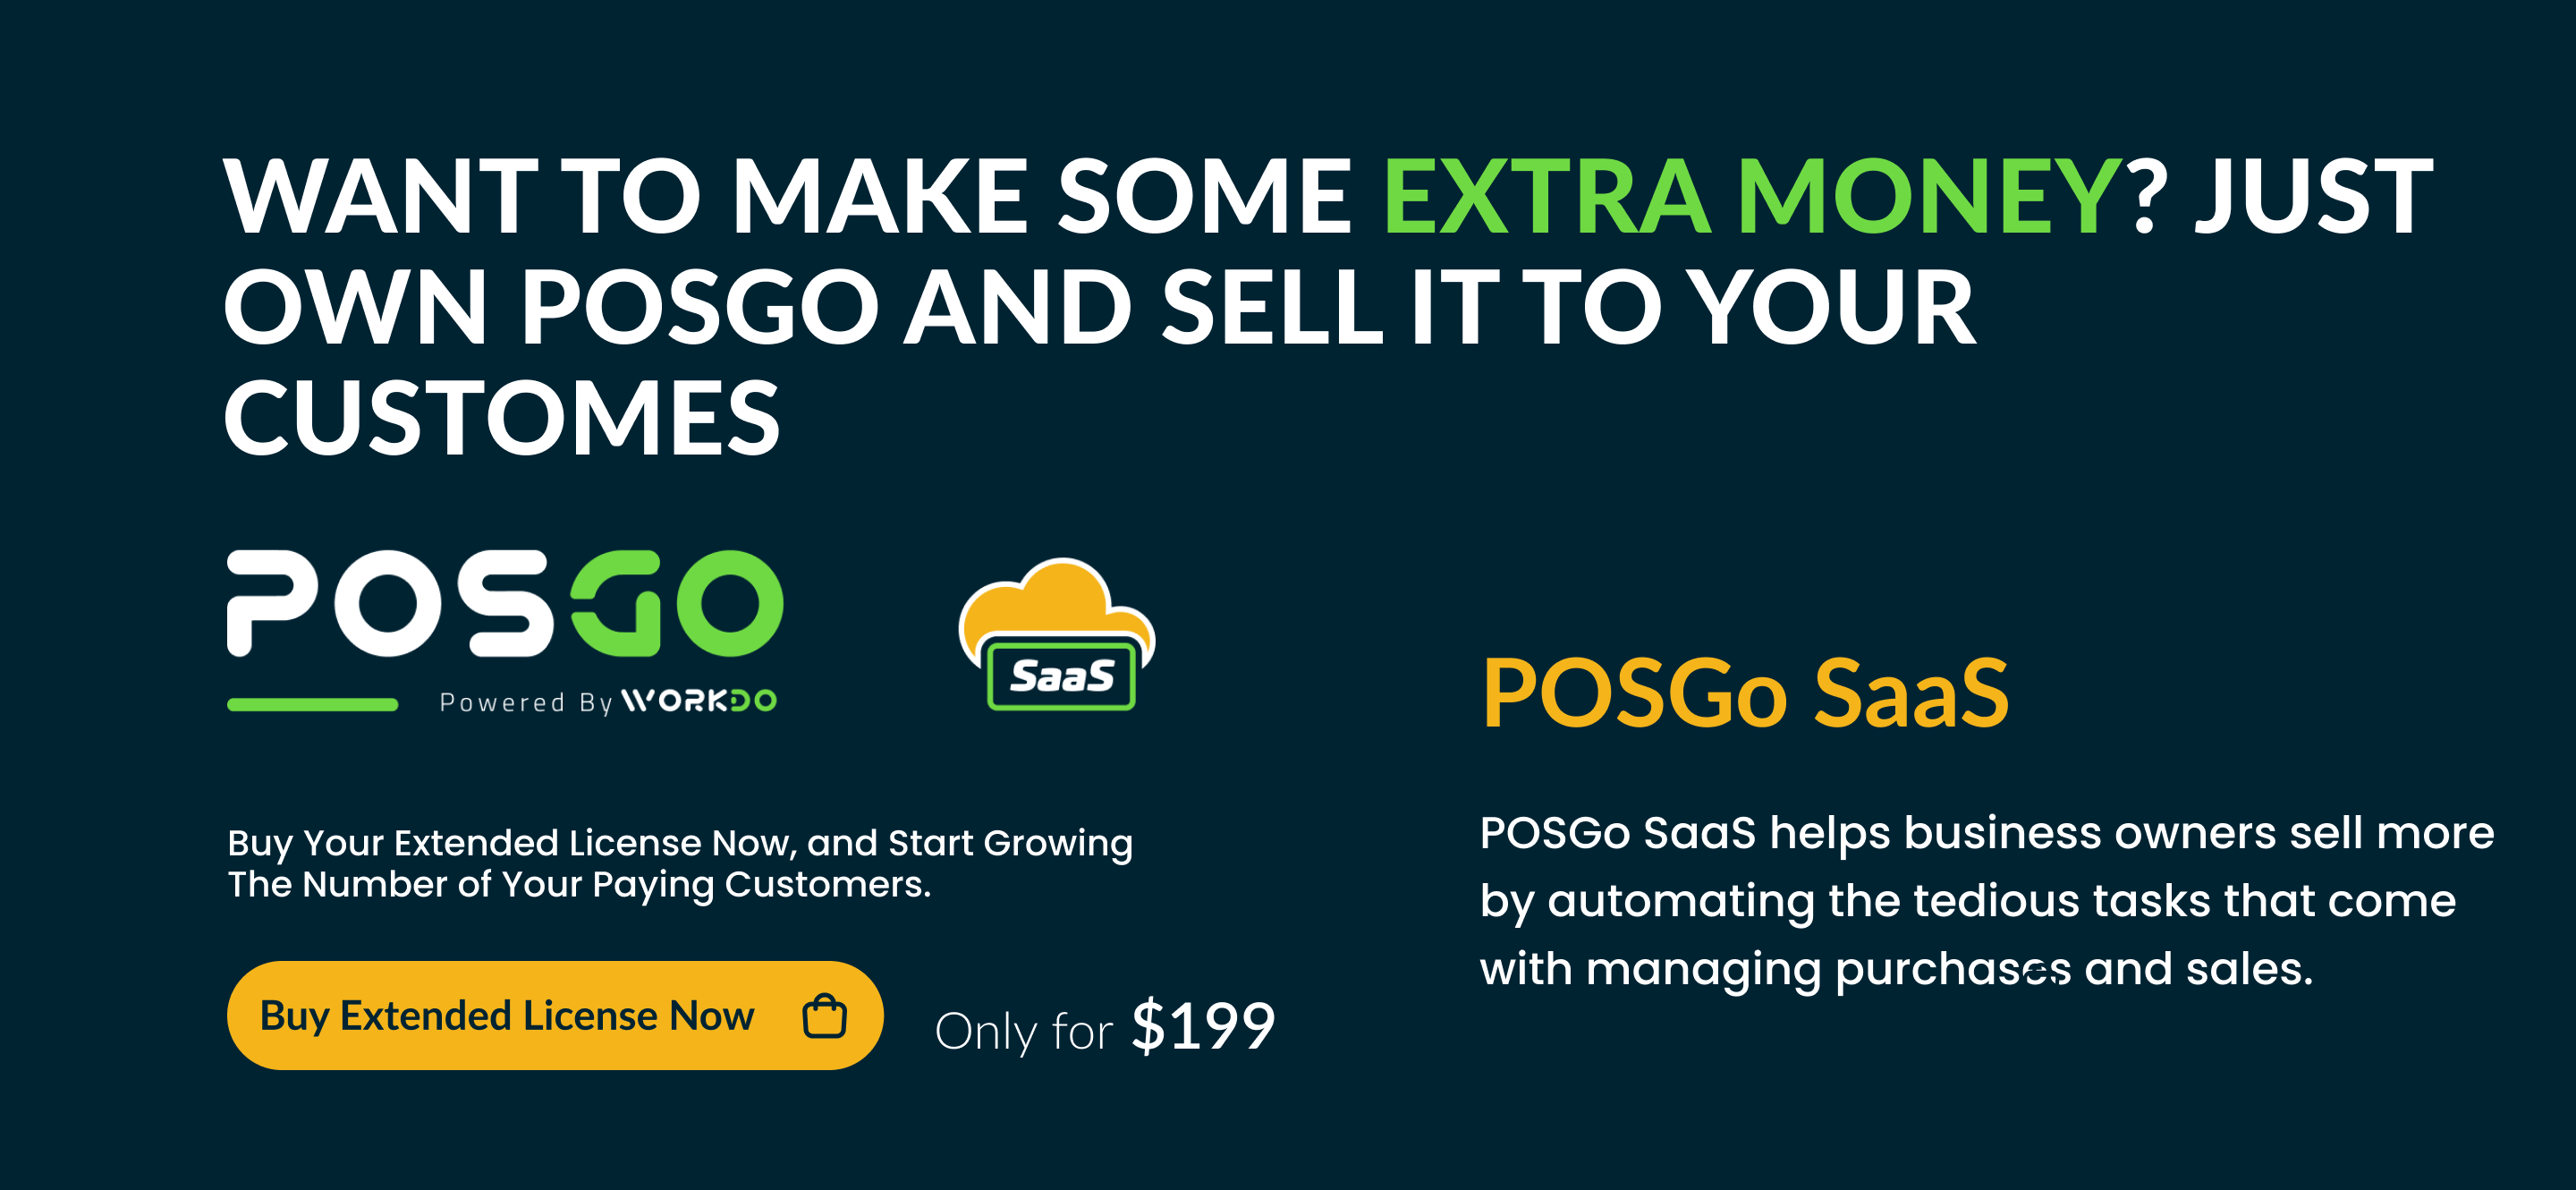 POSGo SaaS - Purchase and Sales Management Tool - 8